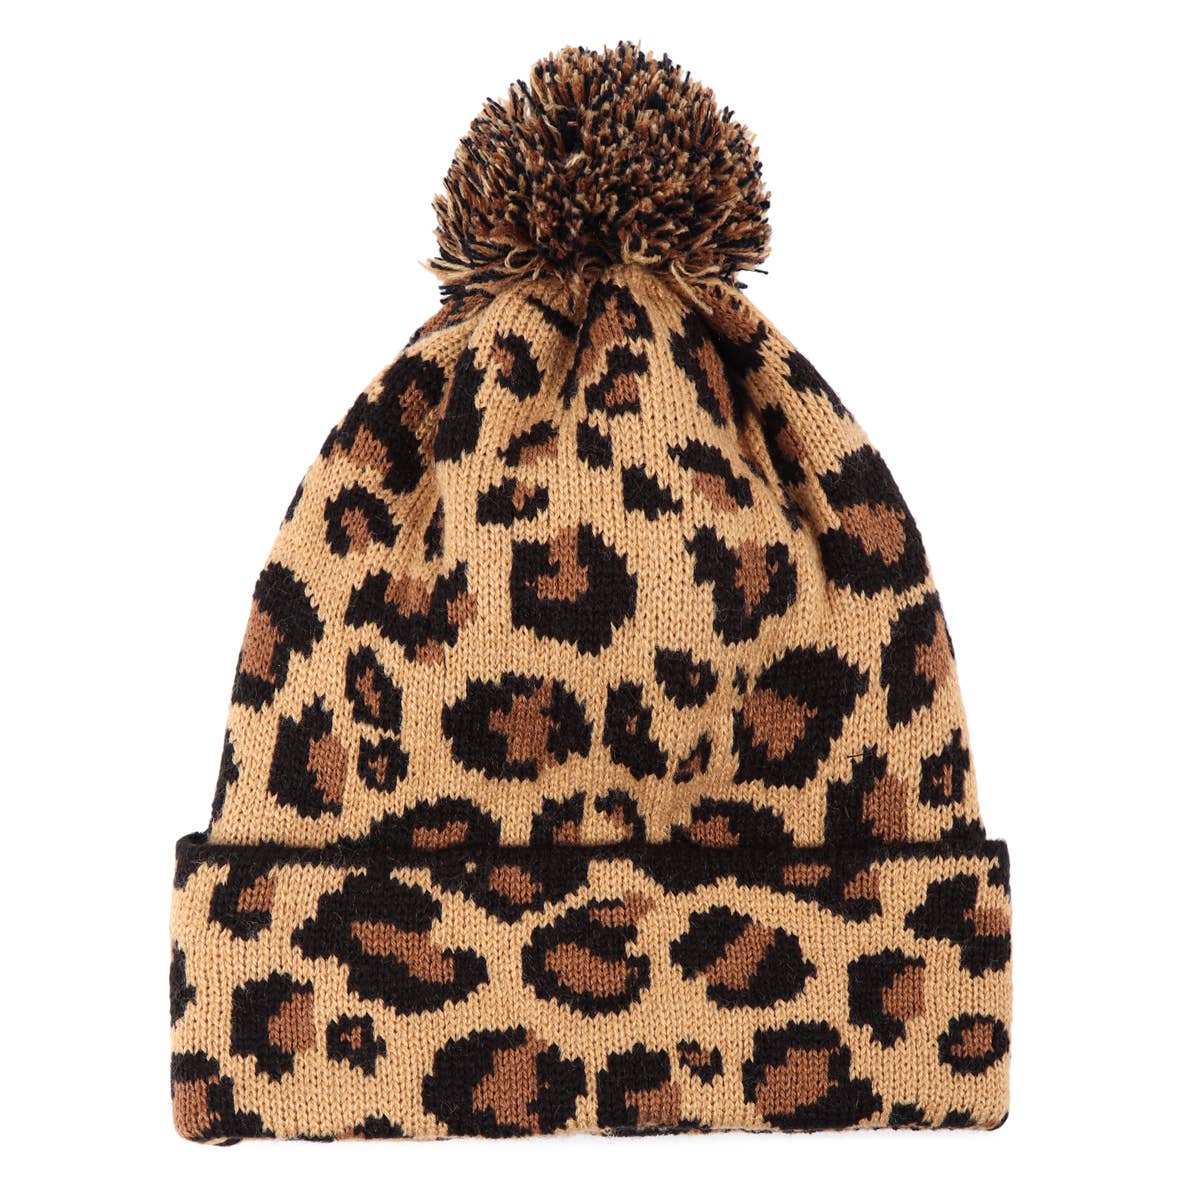 LEOPARD KNITTED POMPOM BEANIE: Brown